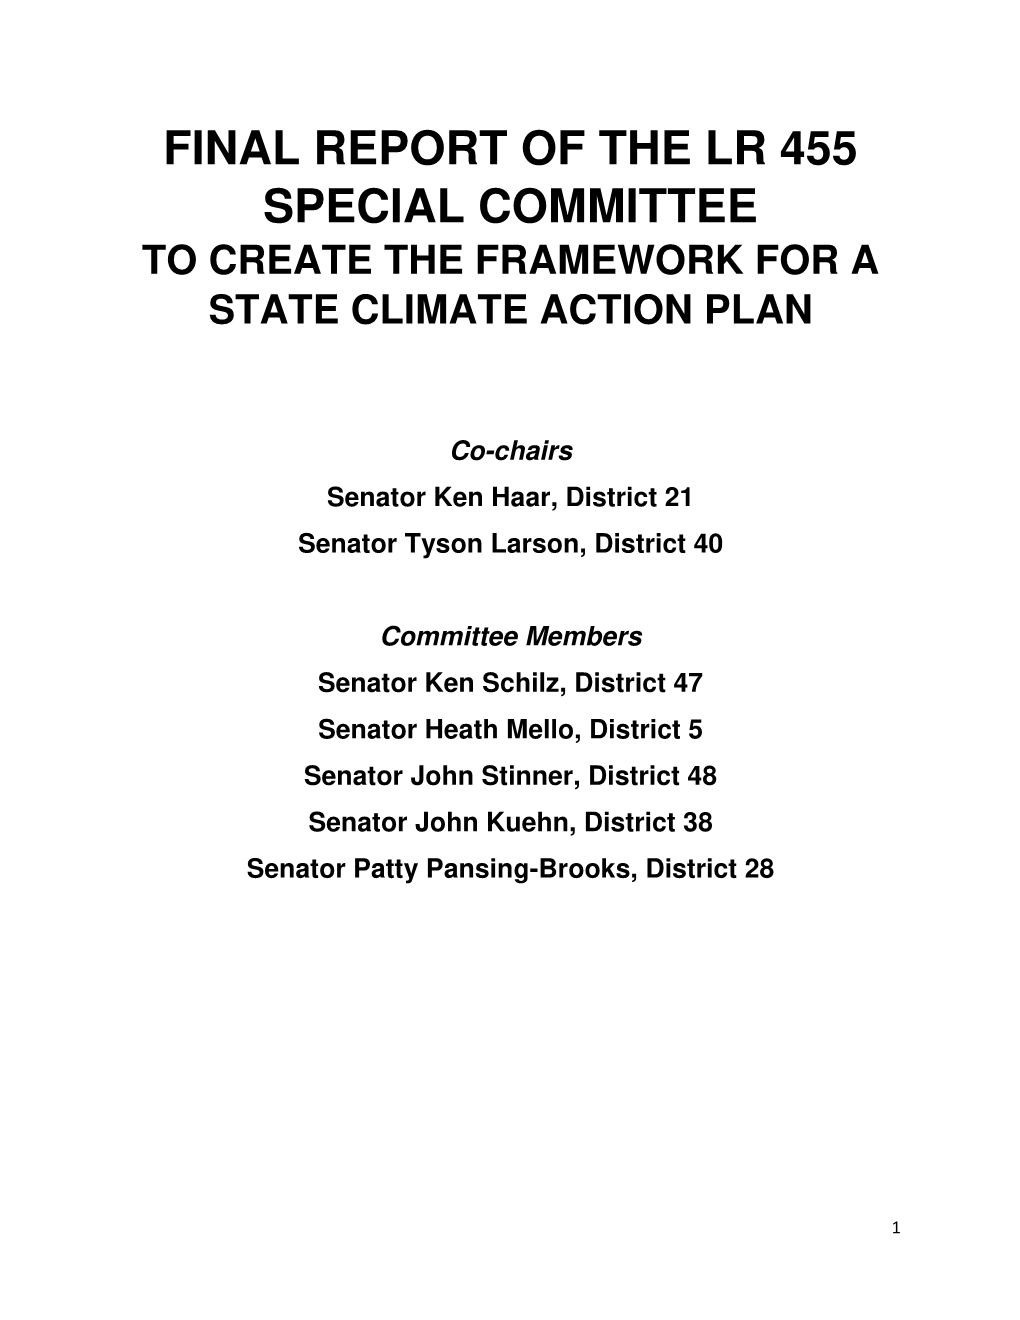 Final Report of the Lr 455 Special Committee to Create the Framework for a State Climate Action Plan